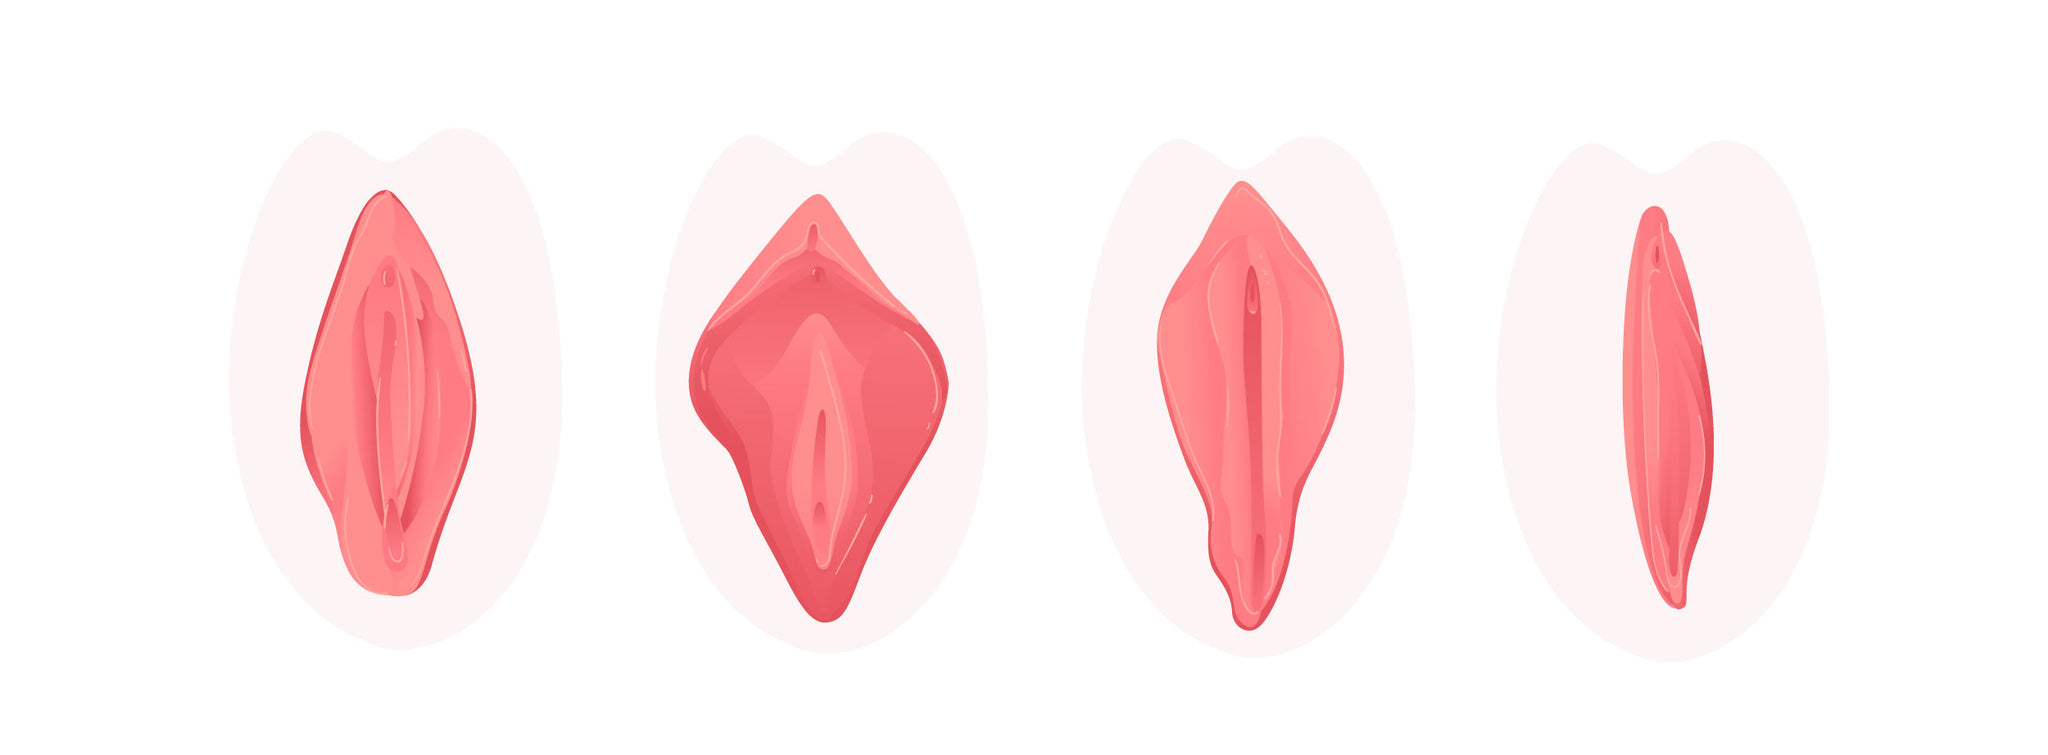 Four images of women’s reproductive system with varying shapes and sizes.